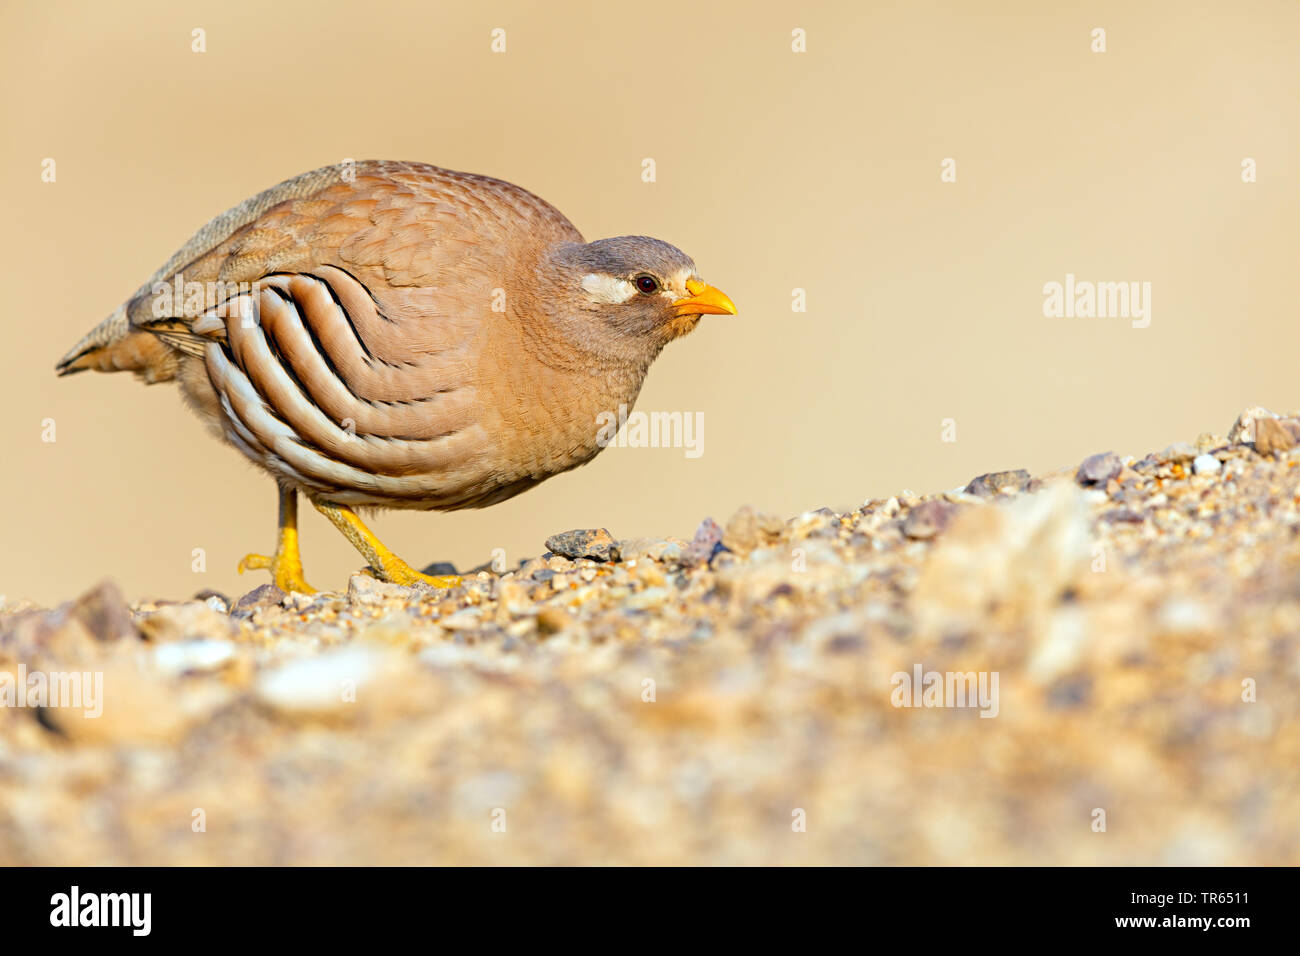 sand partridge (Ammoperdix heyi), searching for food on the ground, Israel Stock Photo